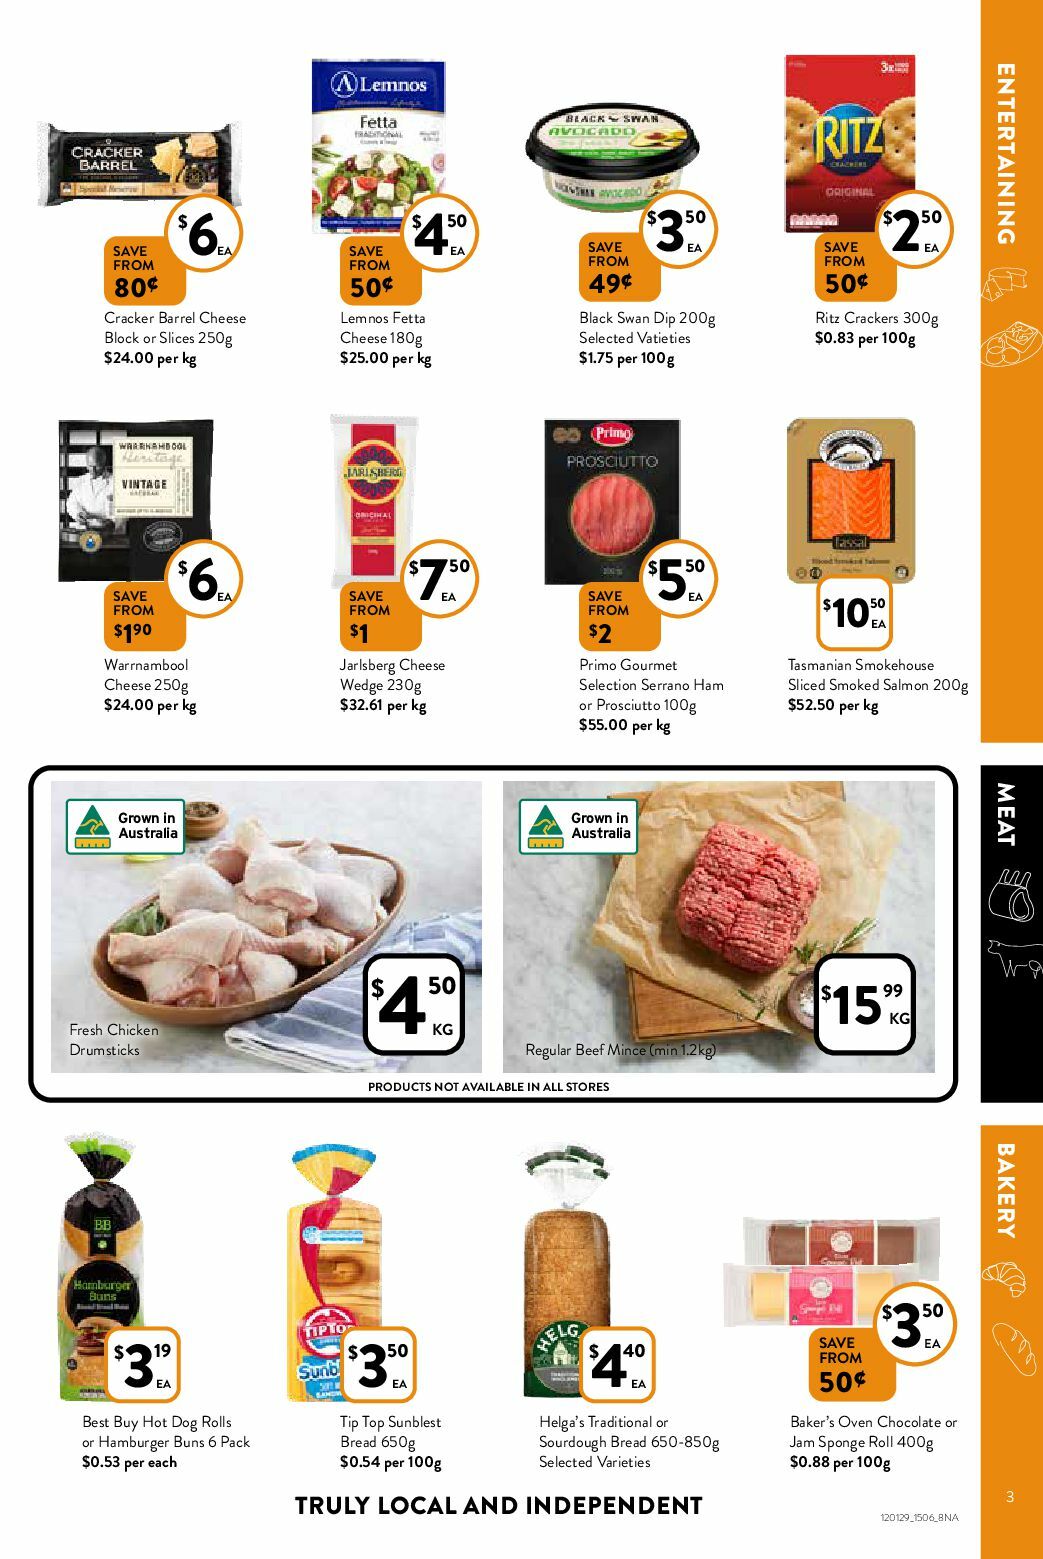 FoodWorks Catalogues from 15 June